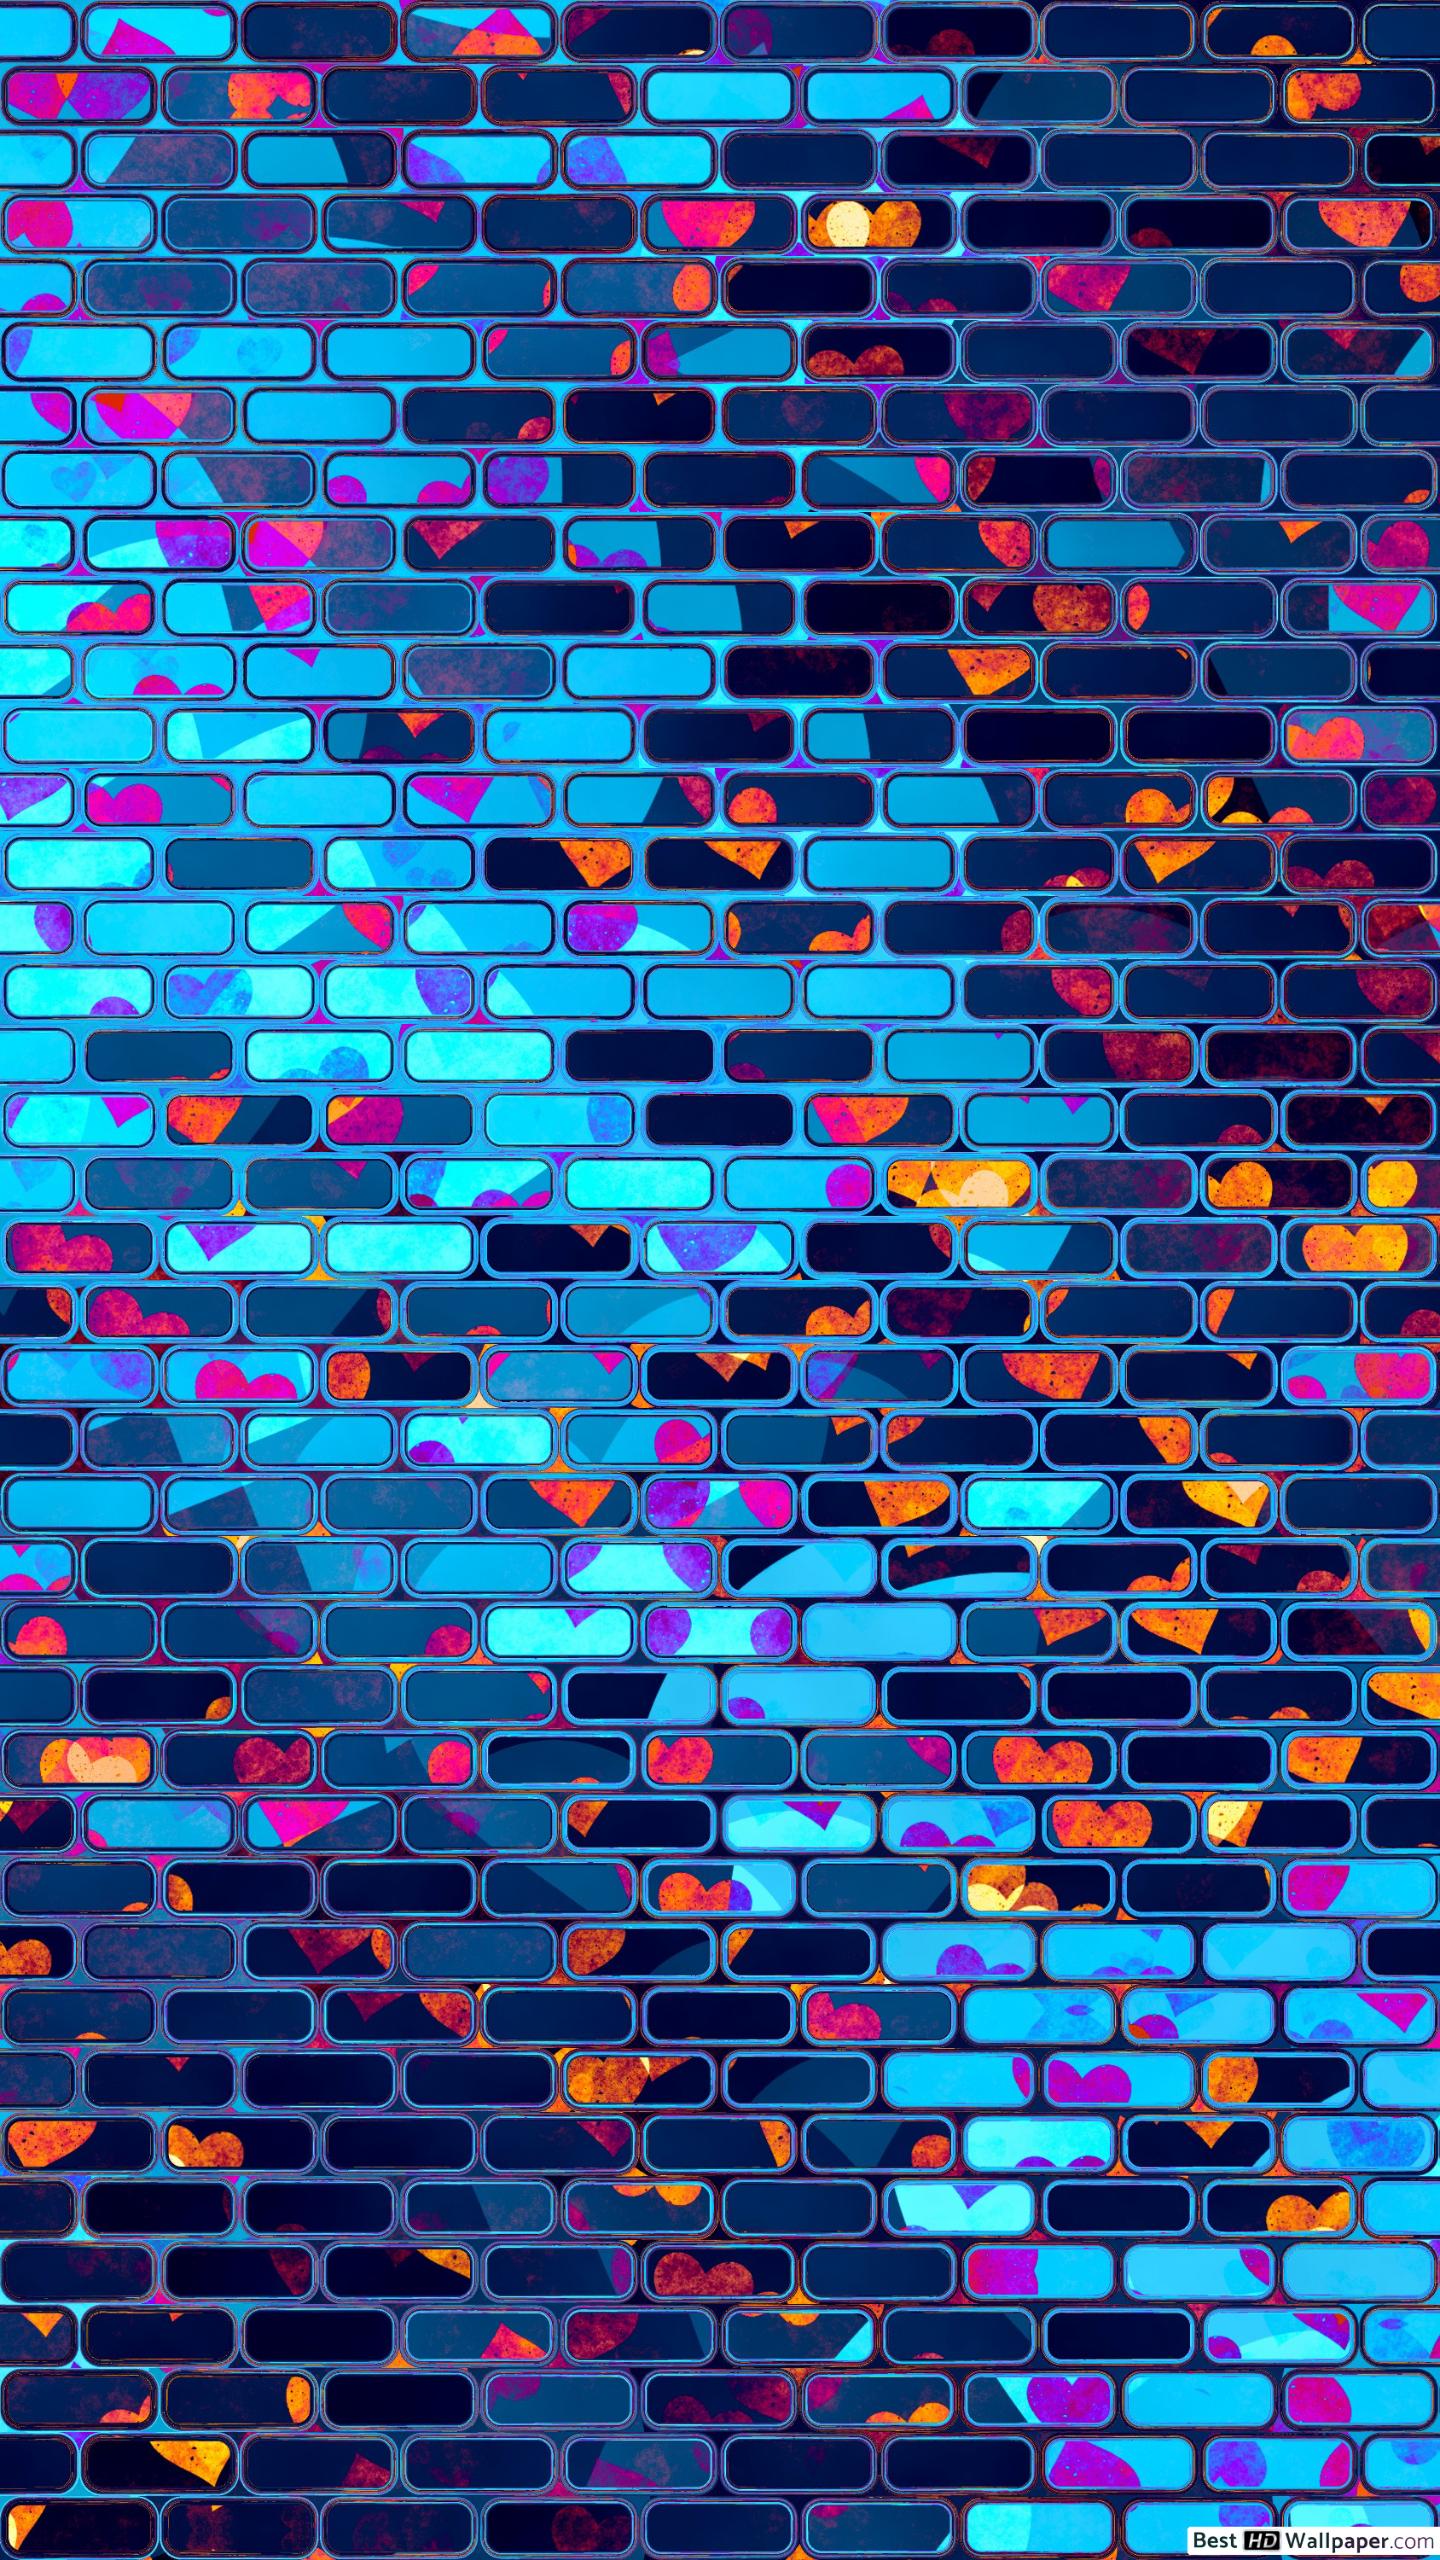 Colorful Wall Background Hd - HD Wallpaper 